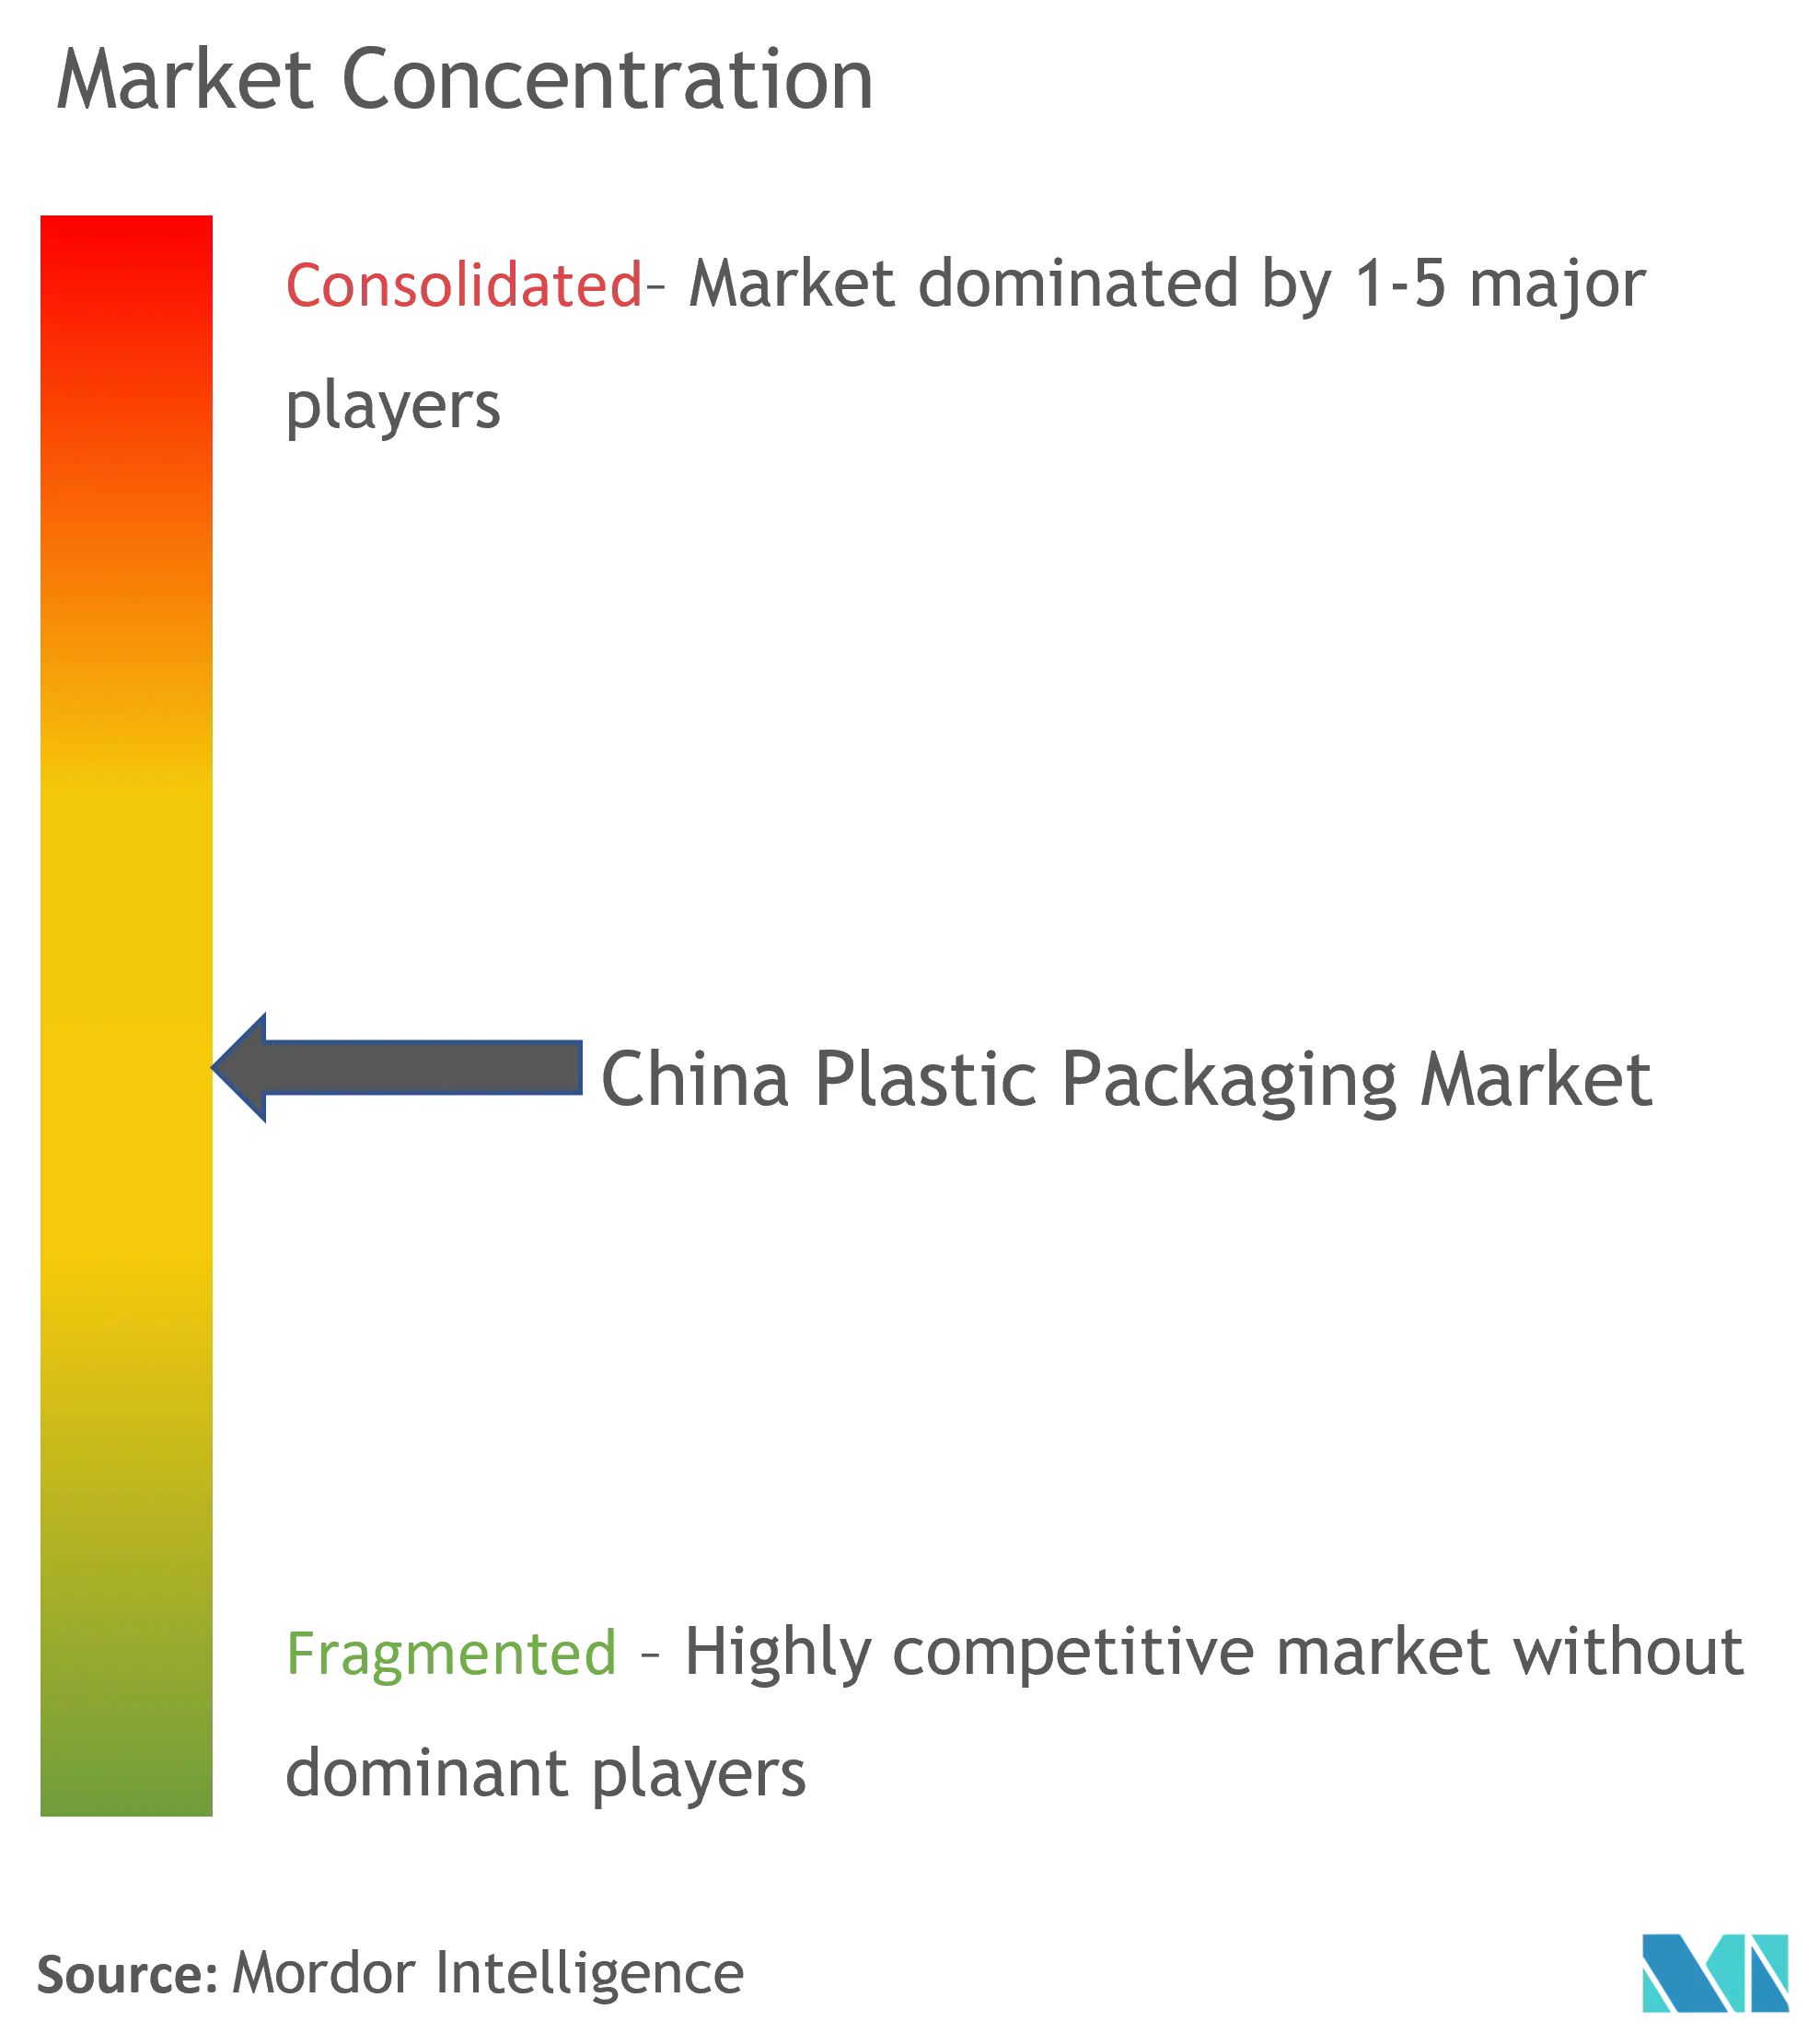 China Plastic Packaging Market 